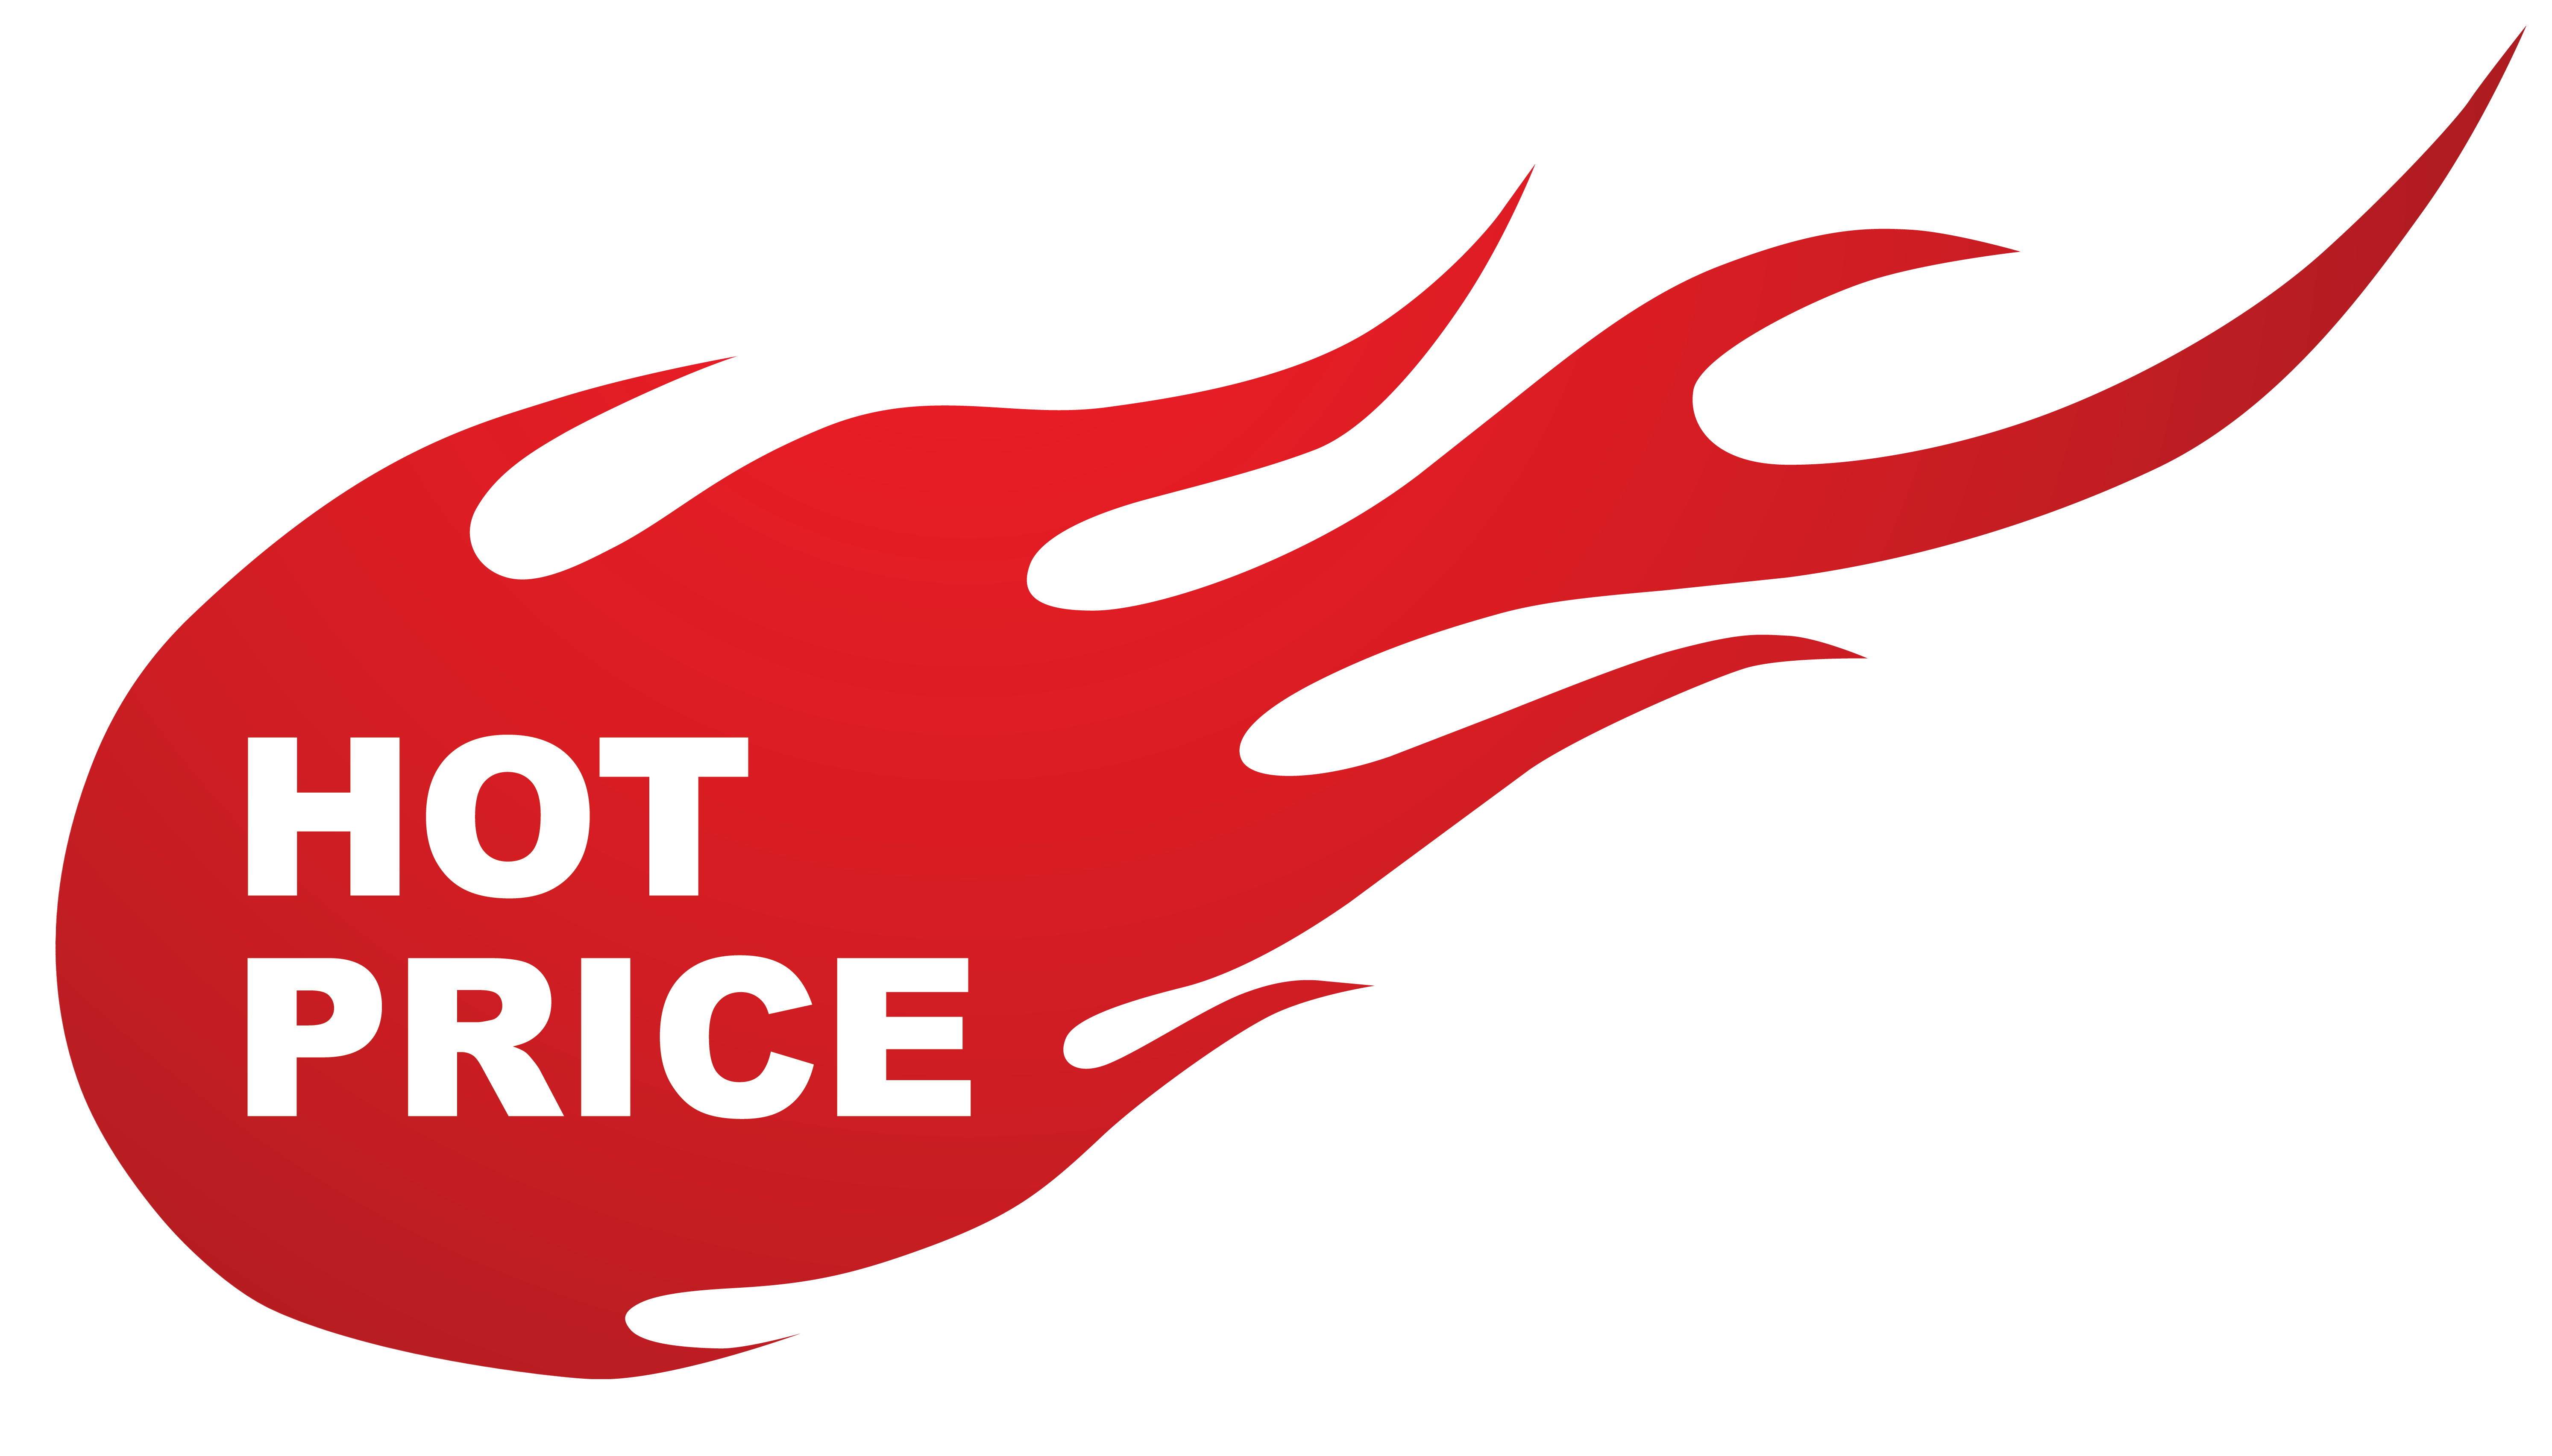 Hot Price Fire Sticker PNG Clipart Image | Gallery ...